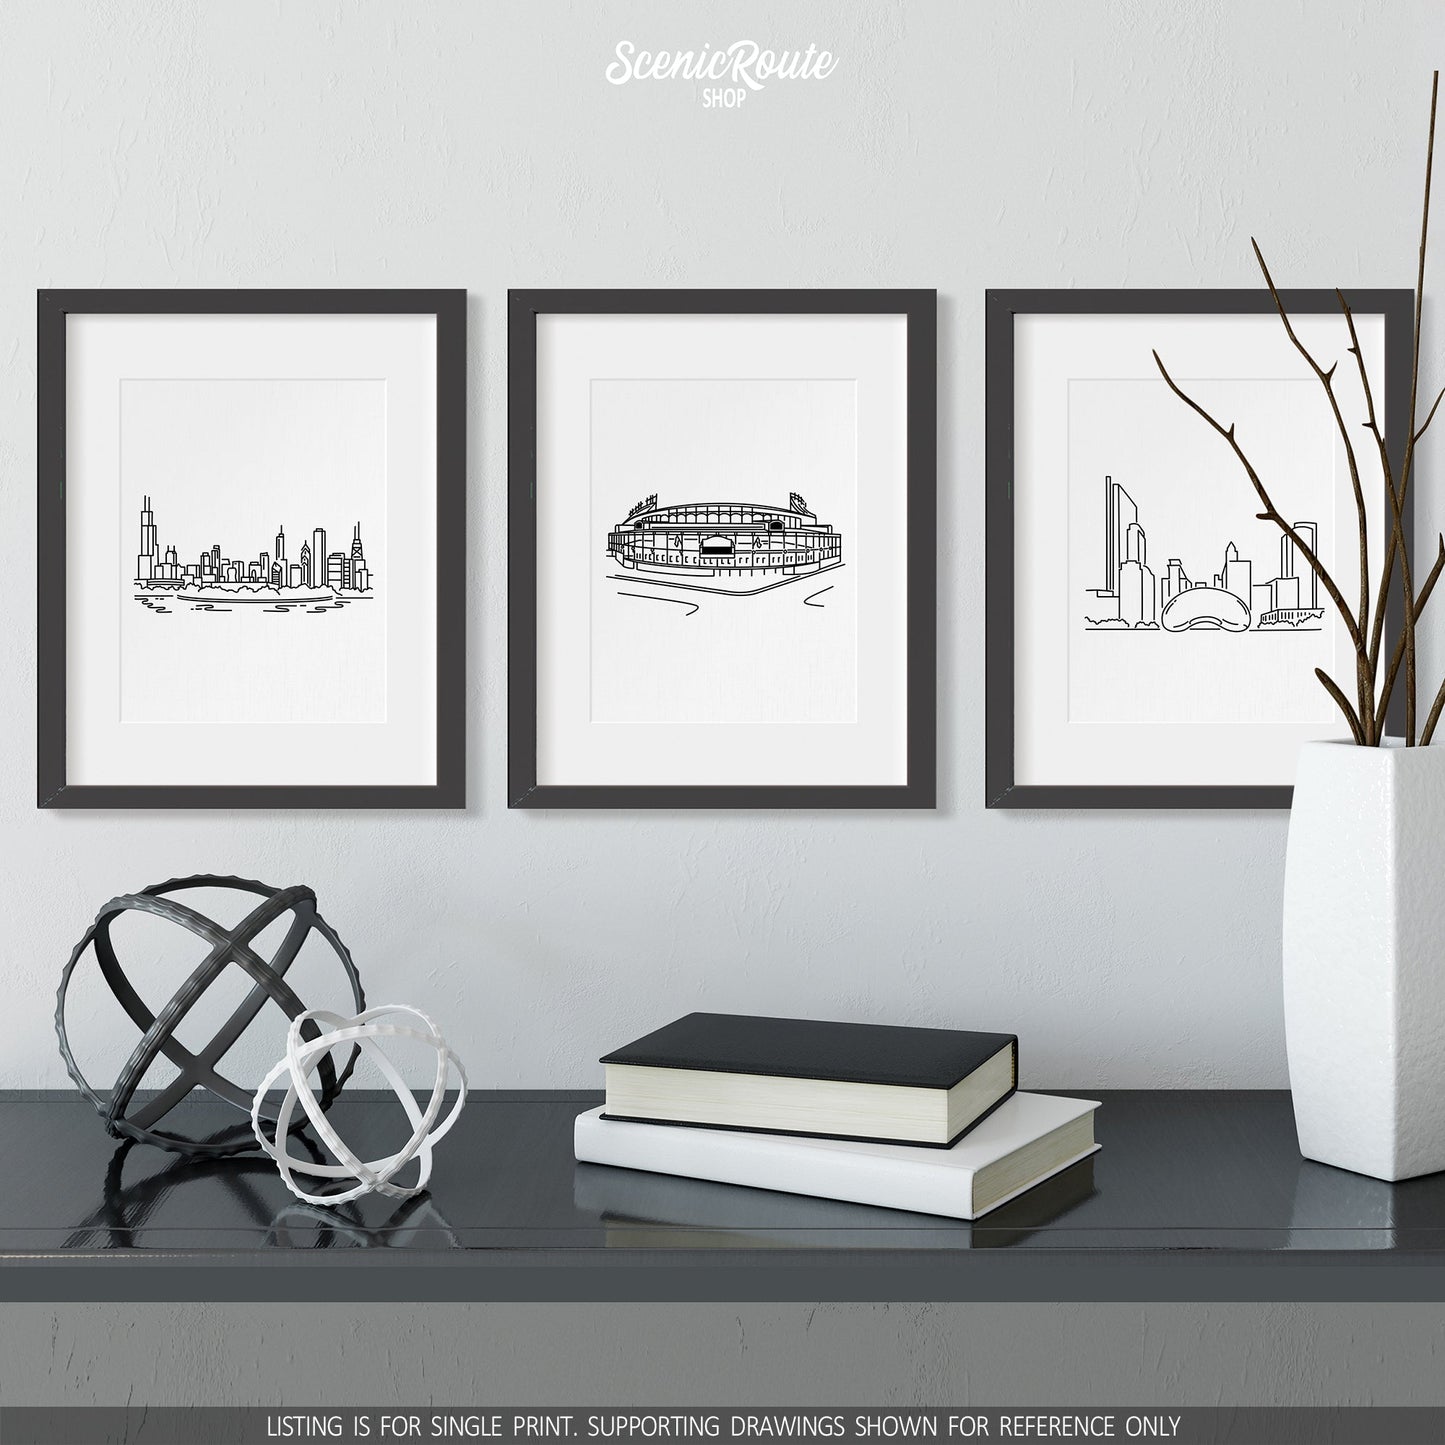 A group of three framed drawings on a wall above a dresser with books and figurines. The line art drawings include the Chicago Skyline, Wrigley Field, and the Bean Cloudgate Sculpture